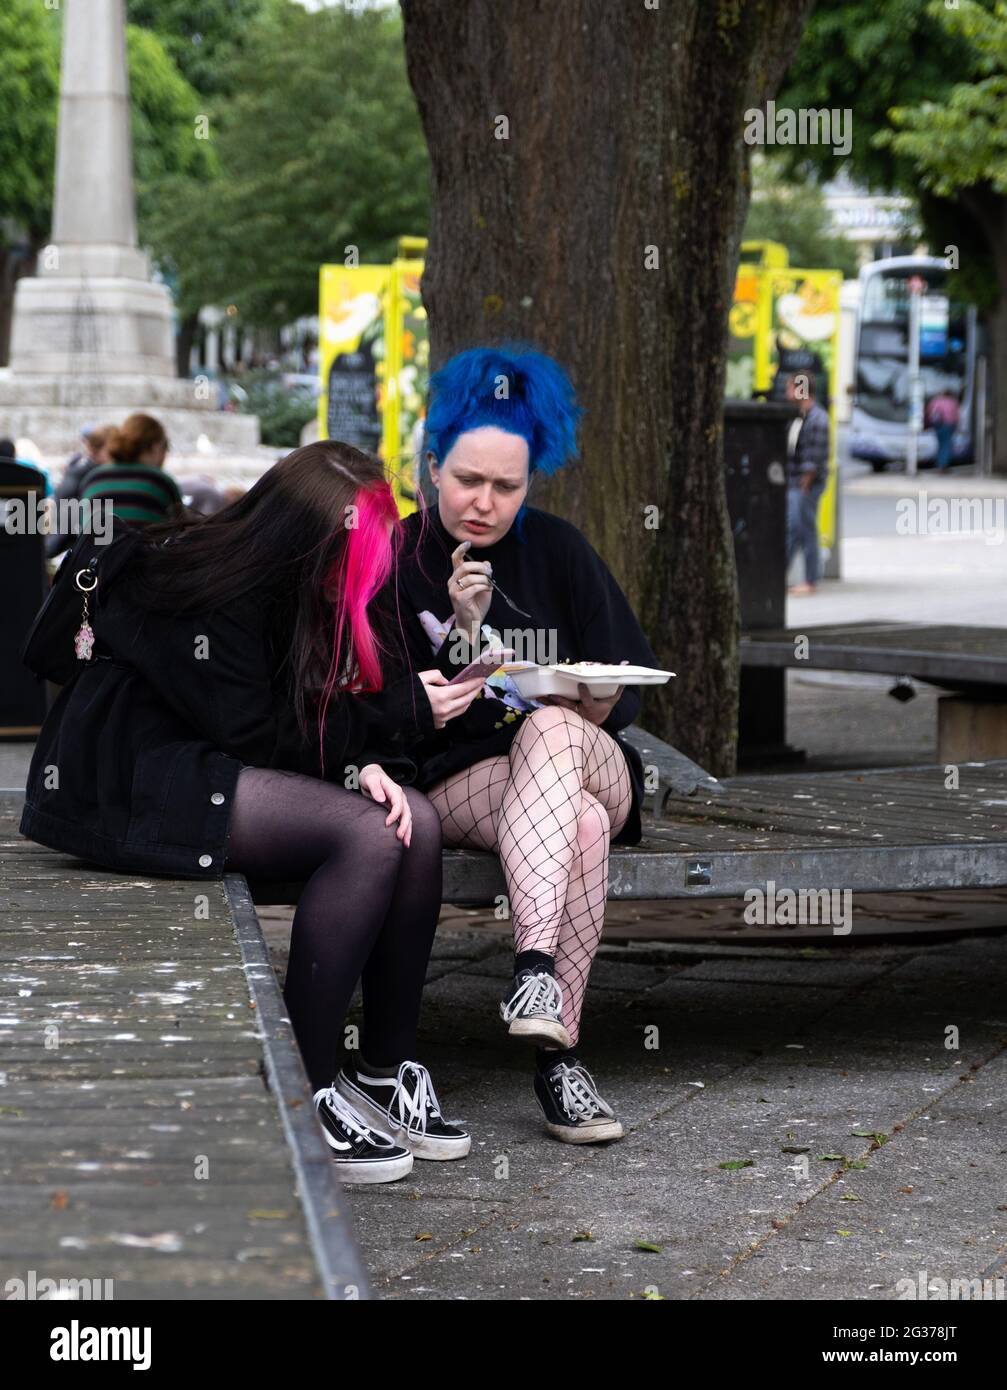 Two young girl protesters with blue and pink hair, short skirts and patterned tights sitting together in central Falmouth having a chat during G7. Stock Photo